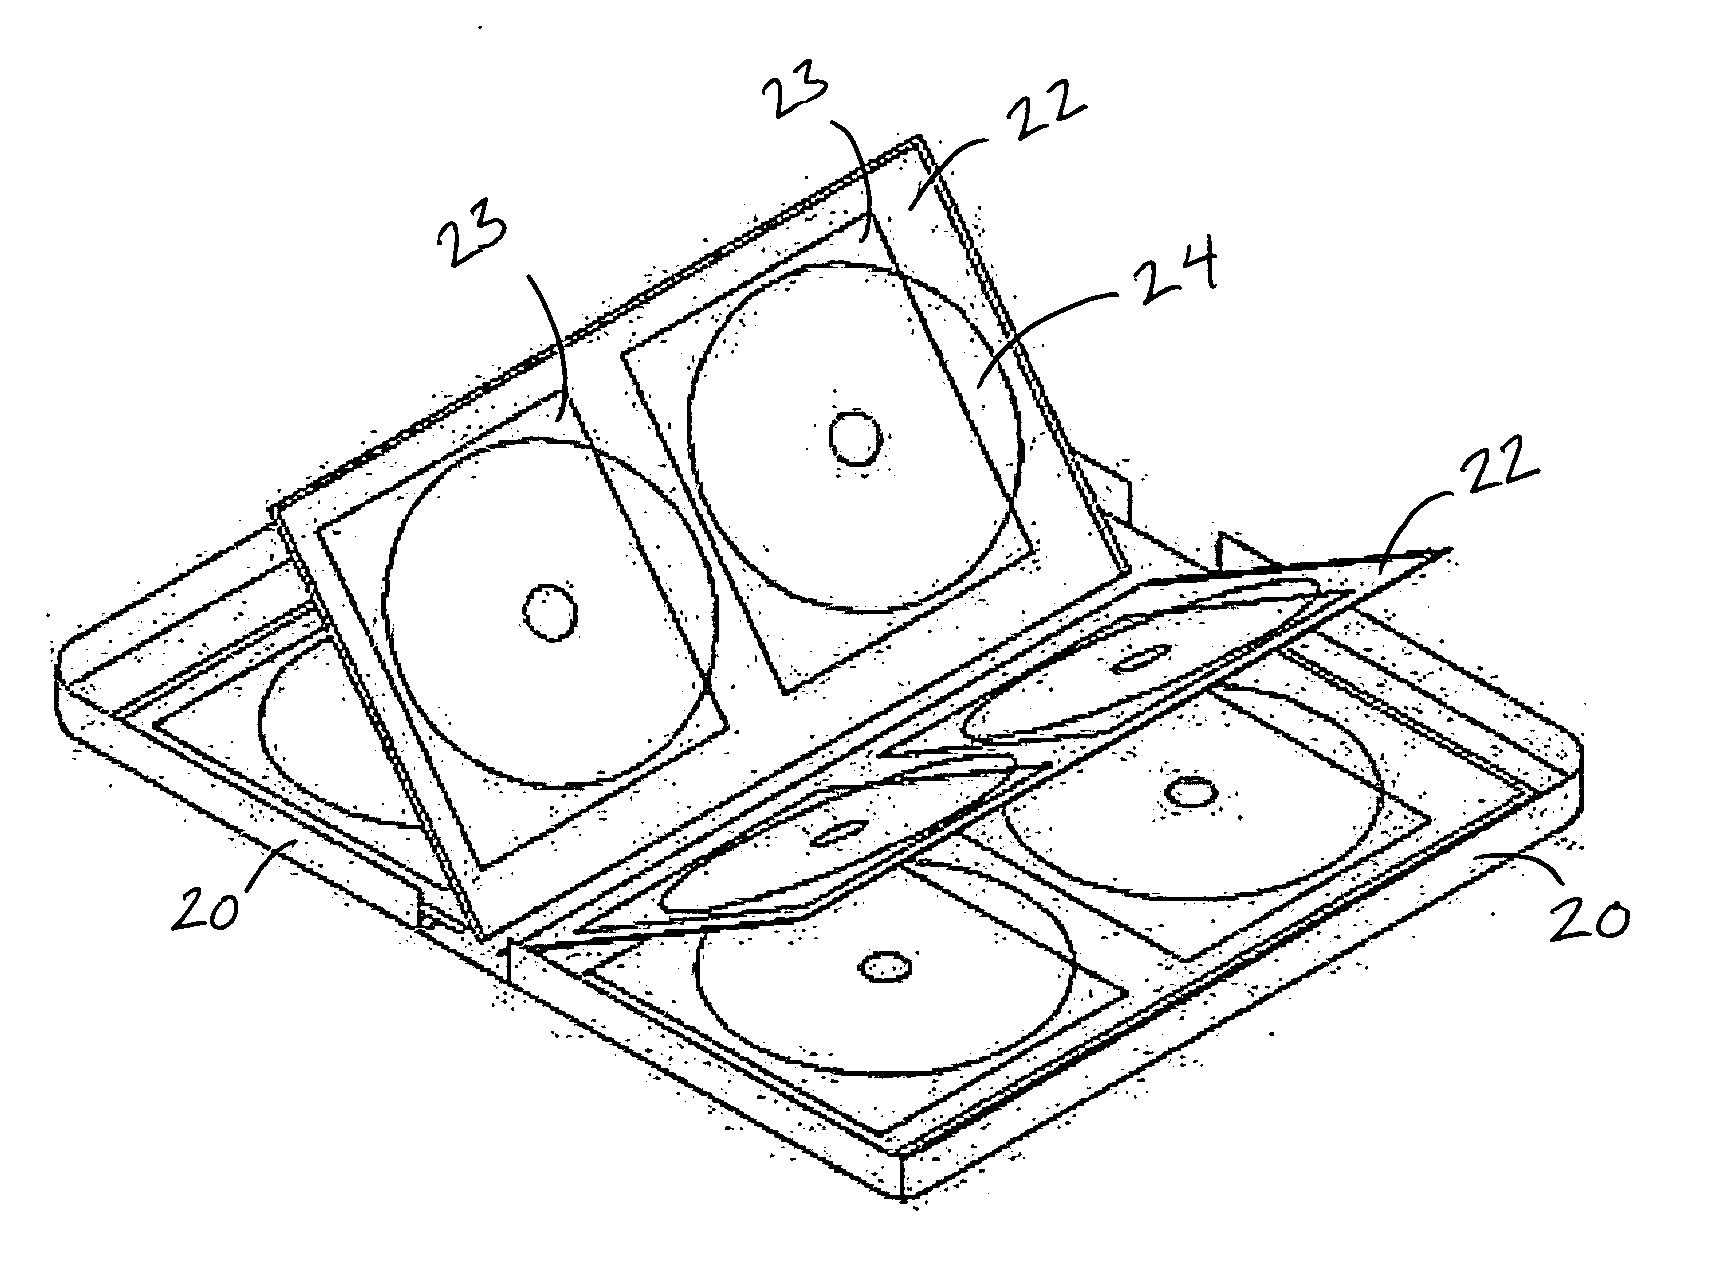 Self-illuminated storage and carrying case